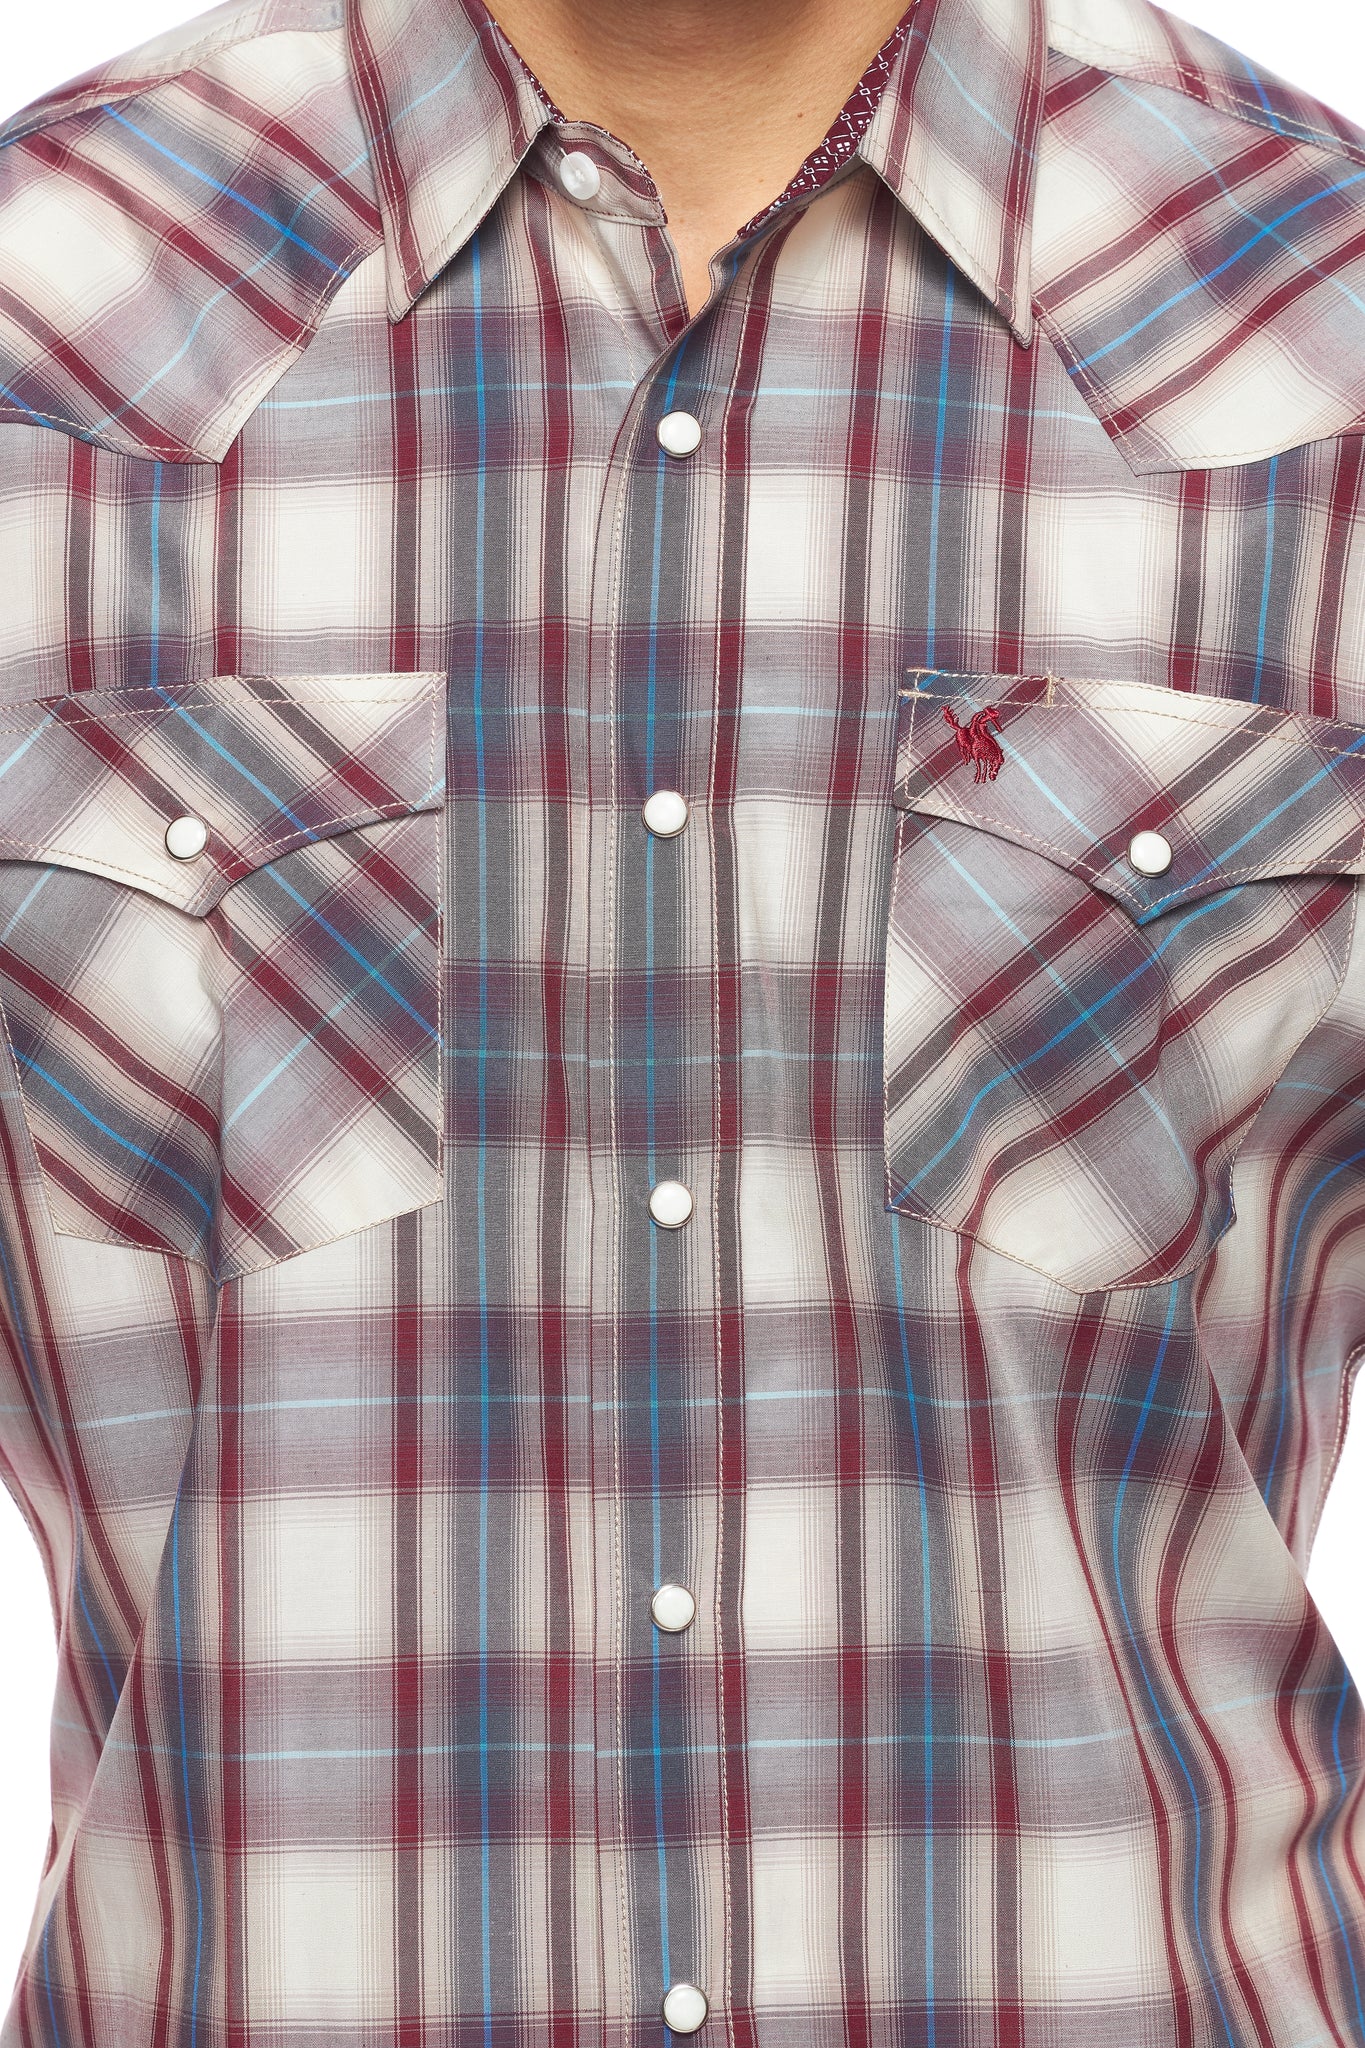 Men's Western Short Sleeve Plaid Shirts With Snap Buttons